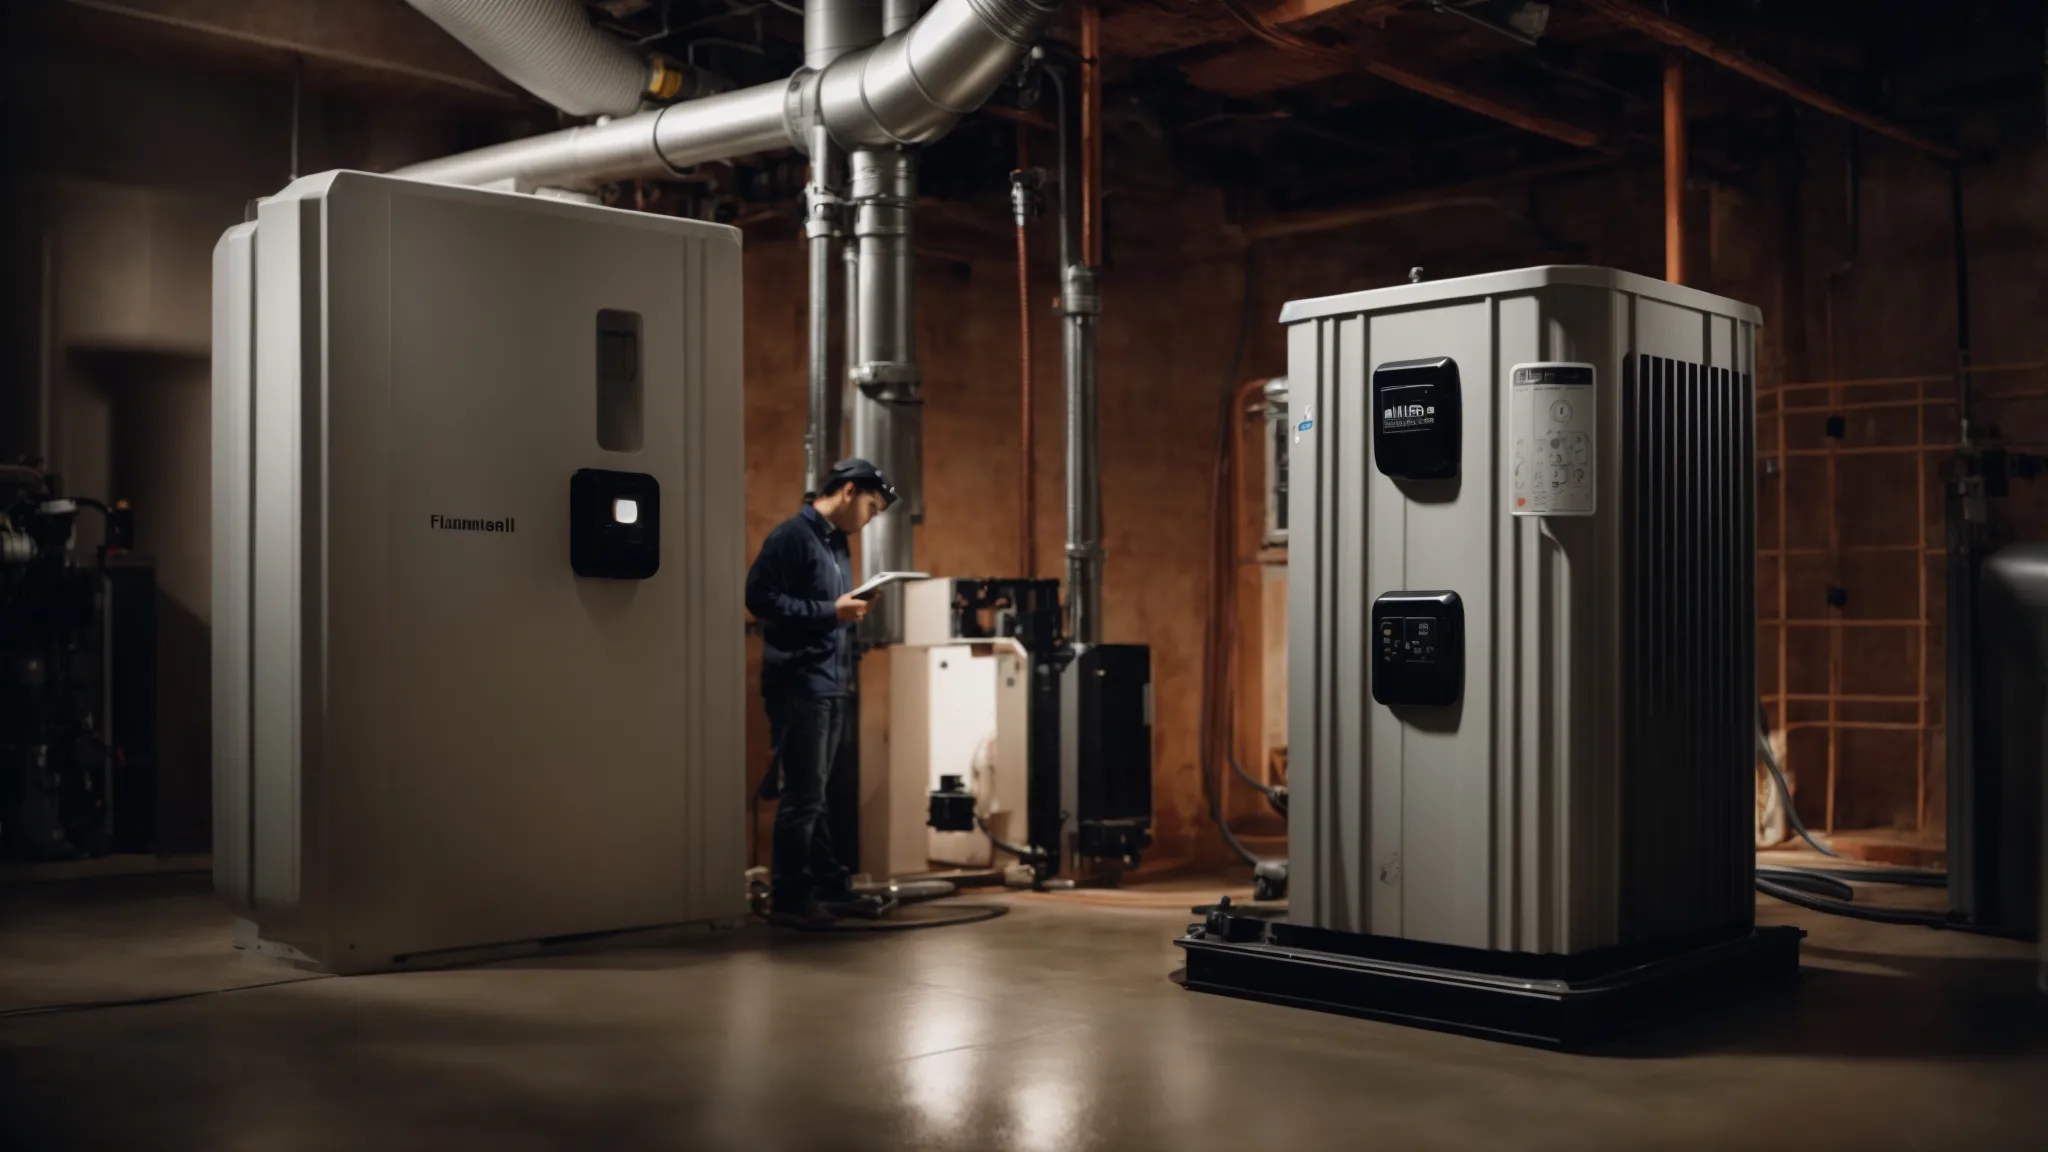 a focused individual attentively examines a modern sump pump system integrated with high-tech alert mechanisms in a clean, well-organized basement.